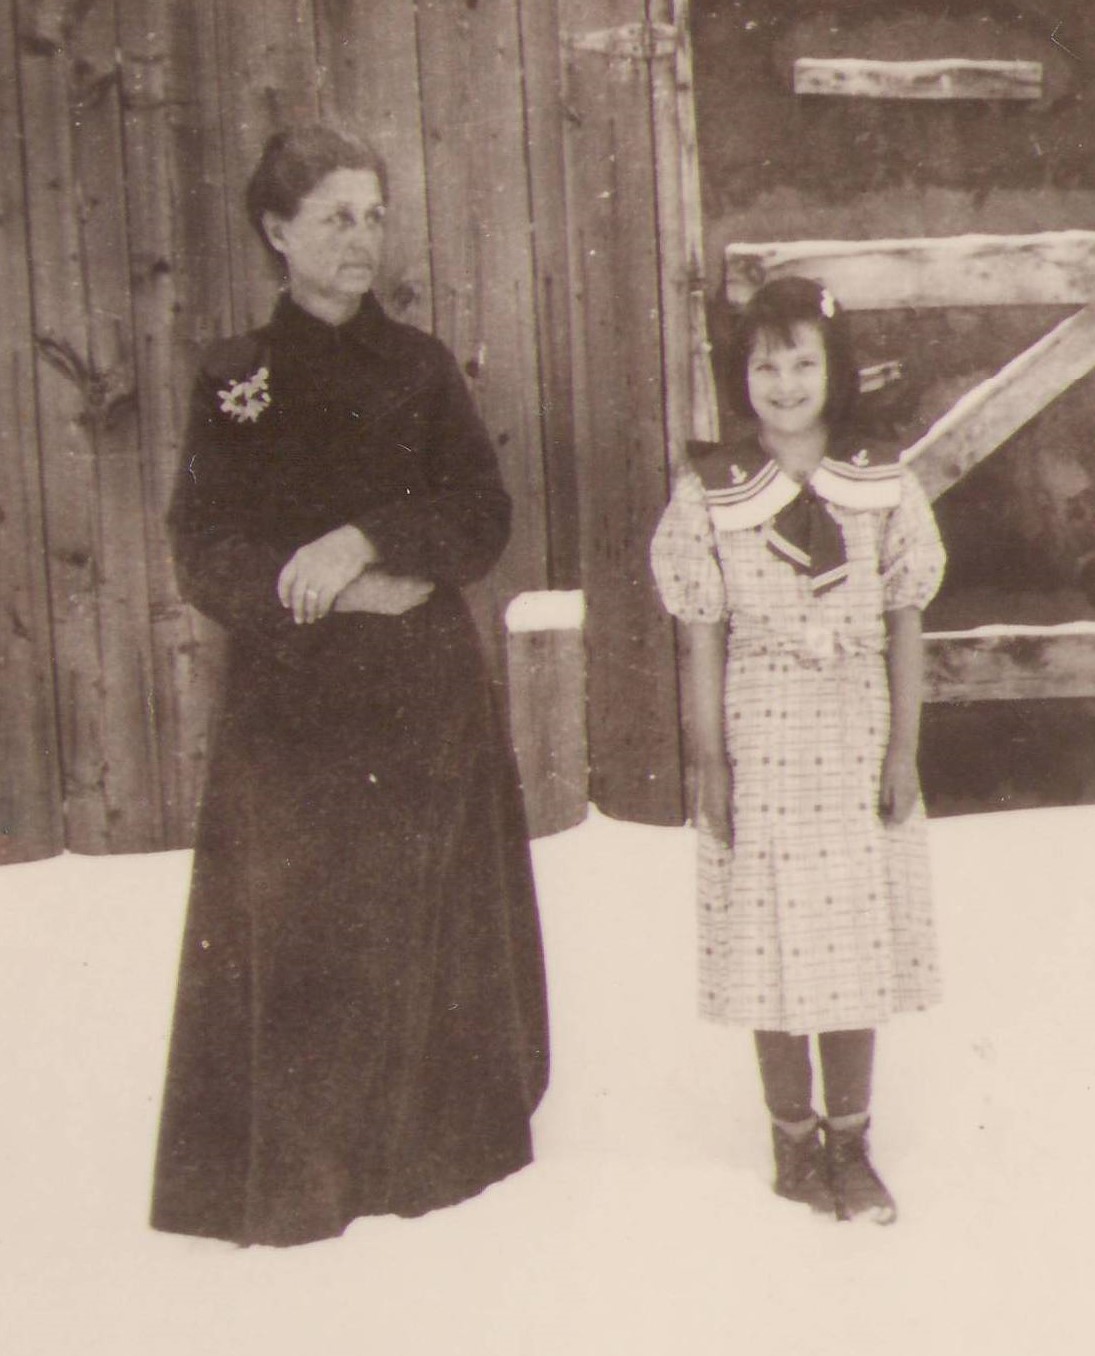 This photo is labelled as "Mrs. Christiansen" who we are assuming is the matriarch on the left. Her given name is Emma and was married to Amos - they moved their combined family to Fort Vermilion in 1920 settling first near the Paddle (Boyer) river and then moving into Lambert Point to attend school. We are not sure who the girl on the right is - our best guess is one of Emma's daughters. It could be Goldie or Emaline! Let us know if you have any more information.

990.4.42.8 / Hassel, Karl